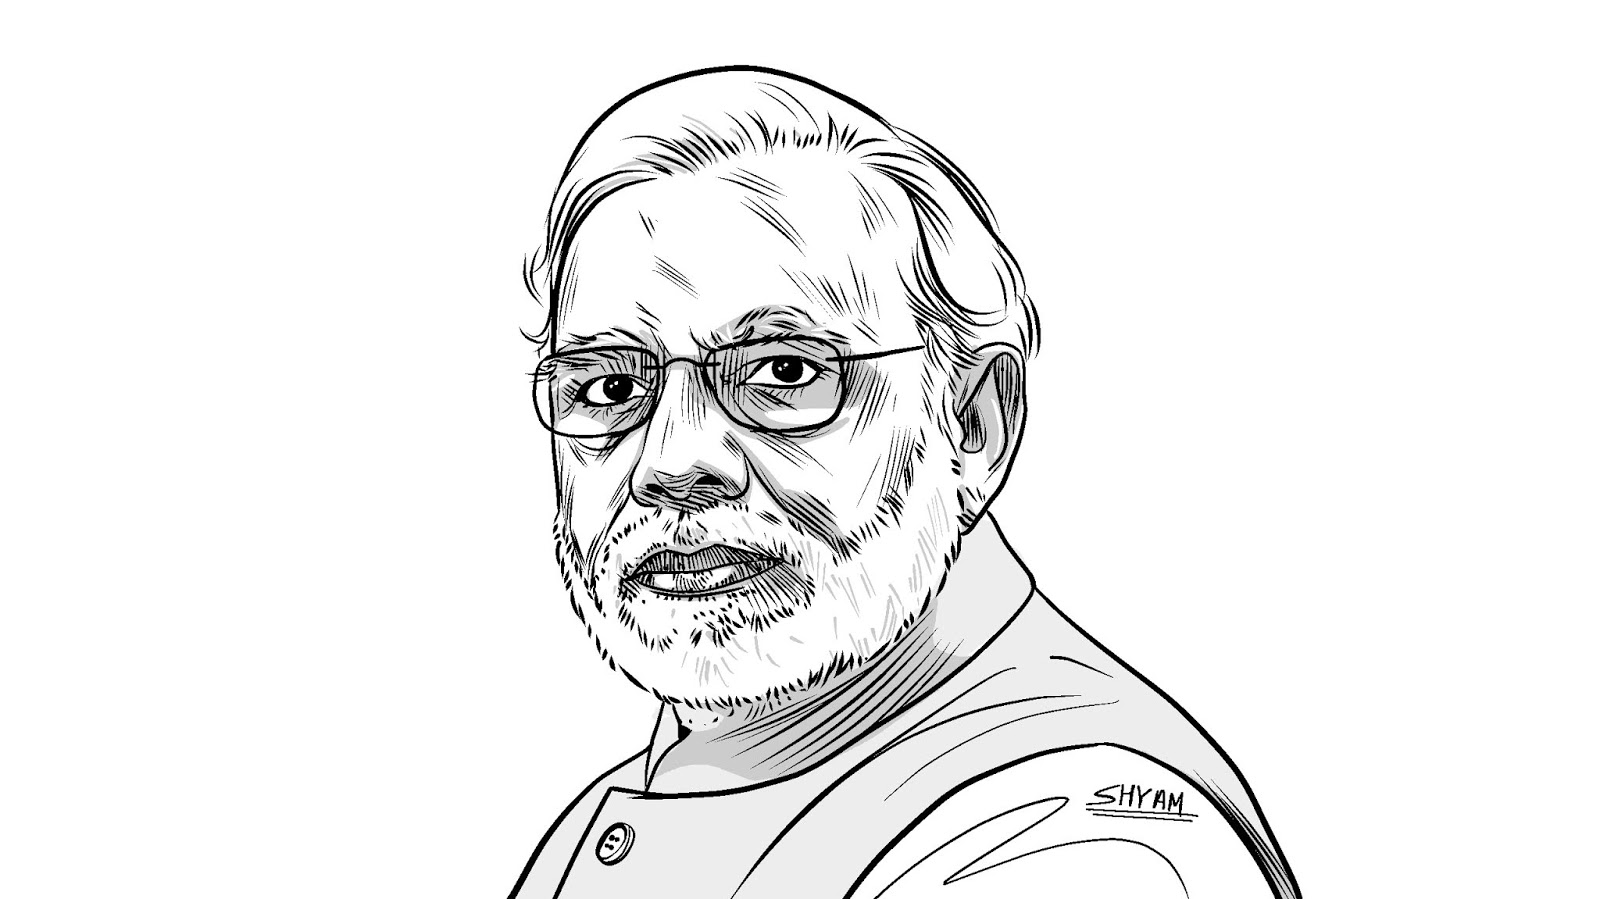 Worlds Largest Pencil Sketch Of PM Narendra Modi Made Check Out The Pic   Indiacom